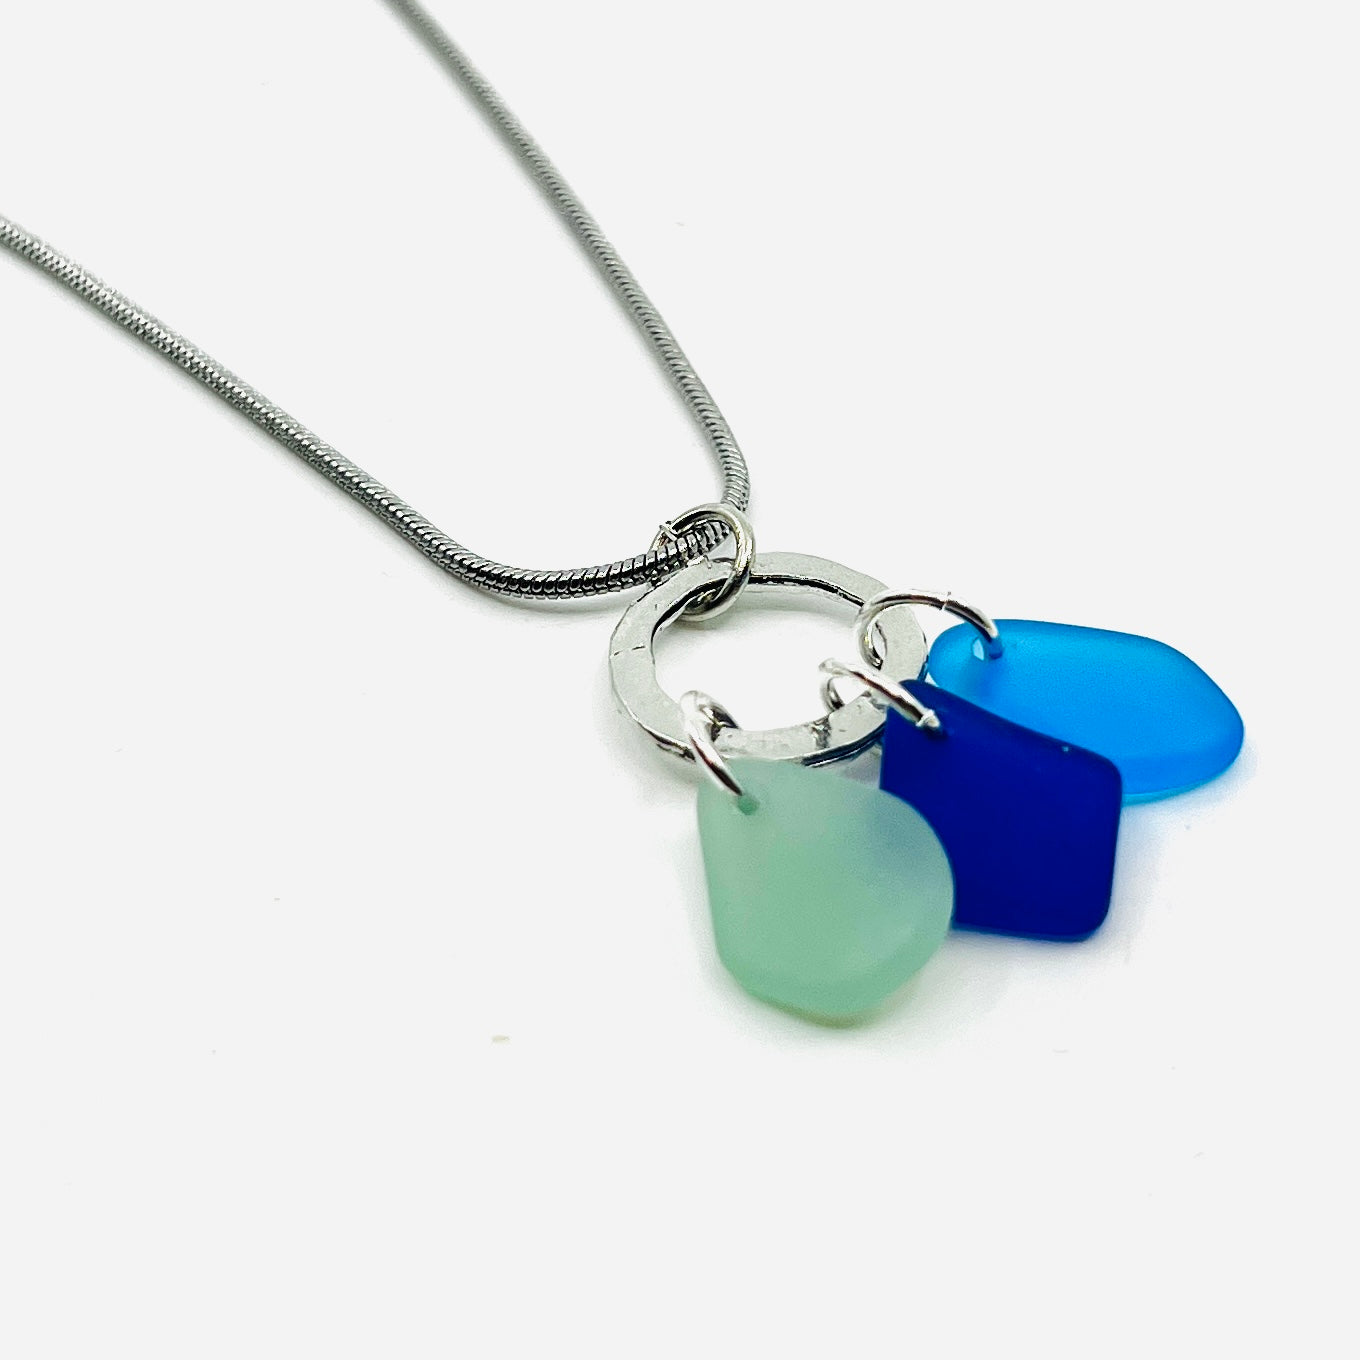 3 Blues- Sea Glass W/ Sterling Floating Charms Locket Necklace